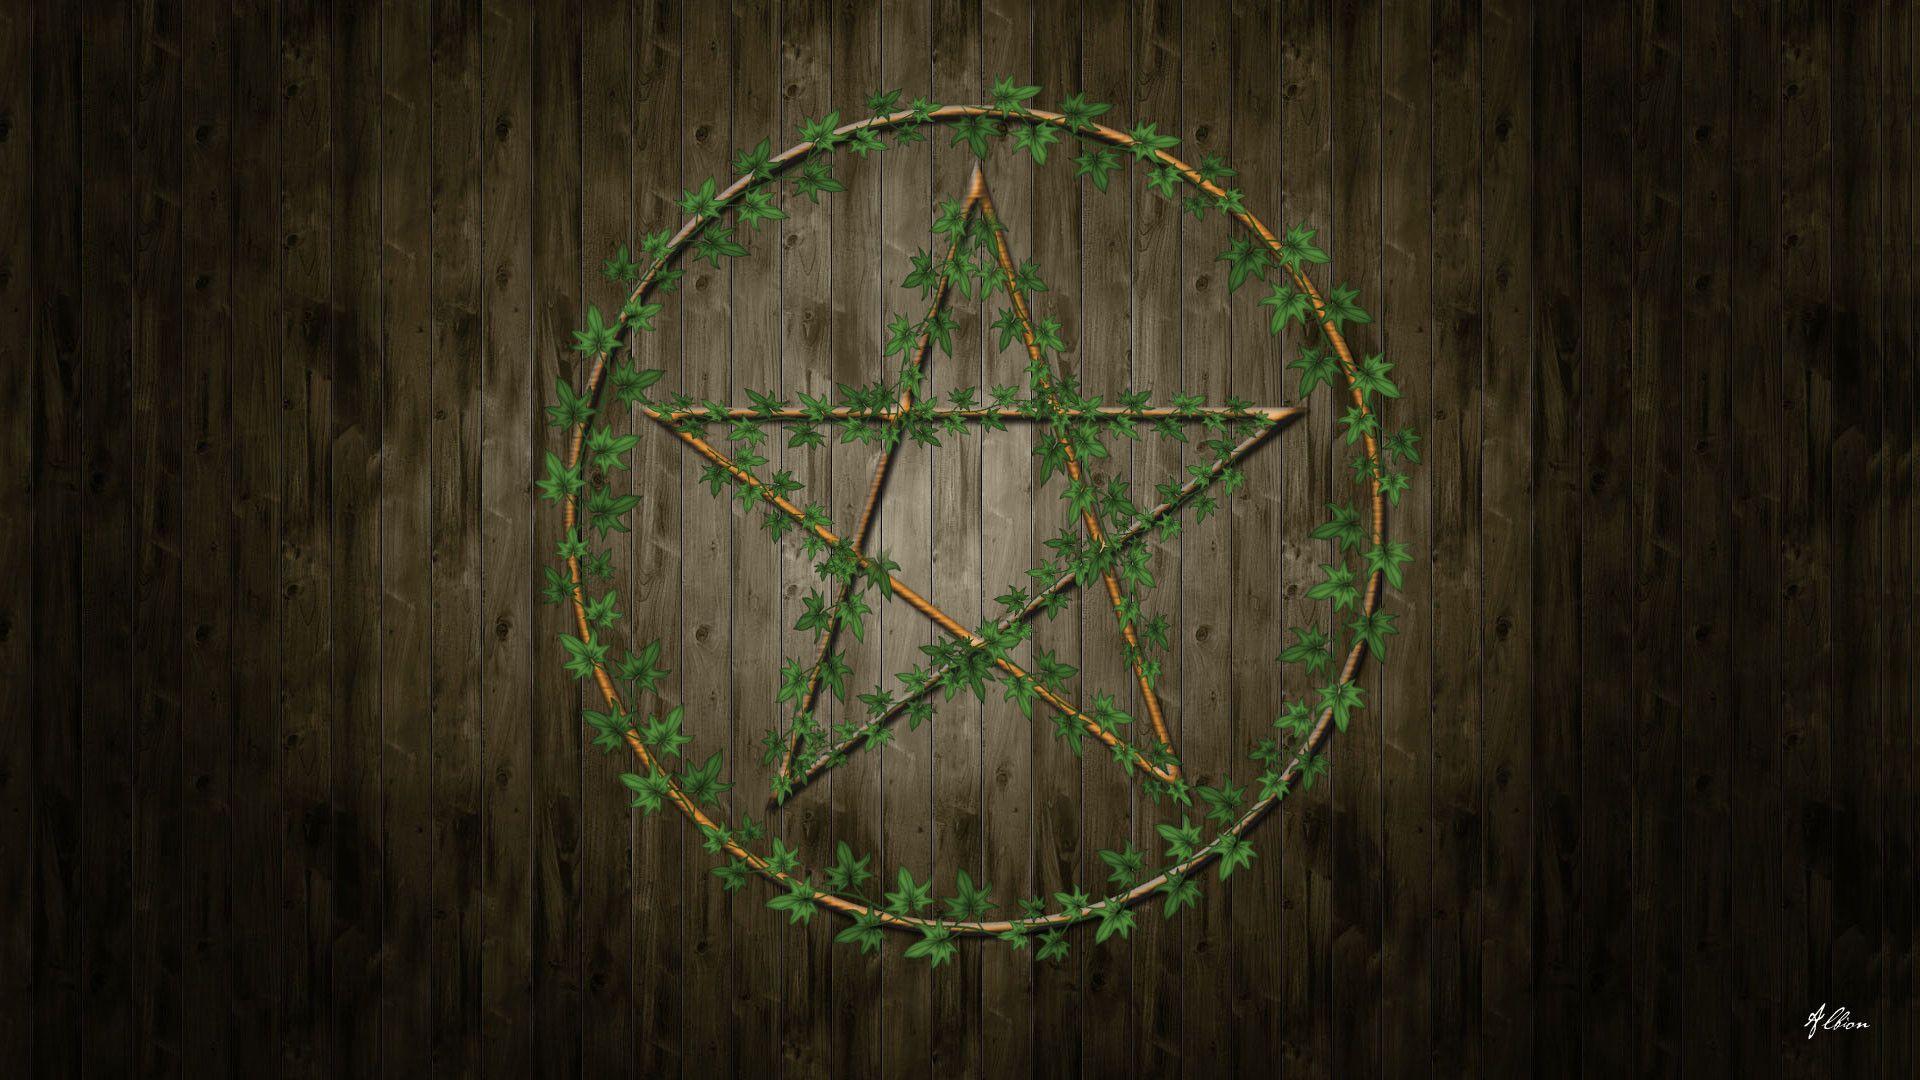 pagan backgrounds